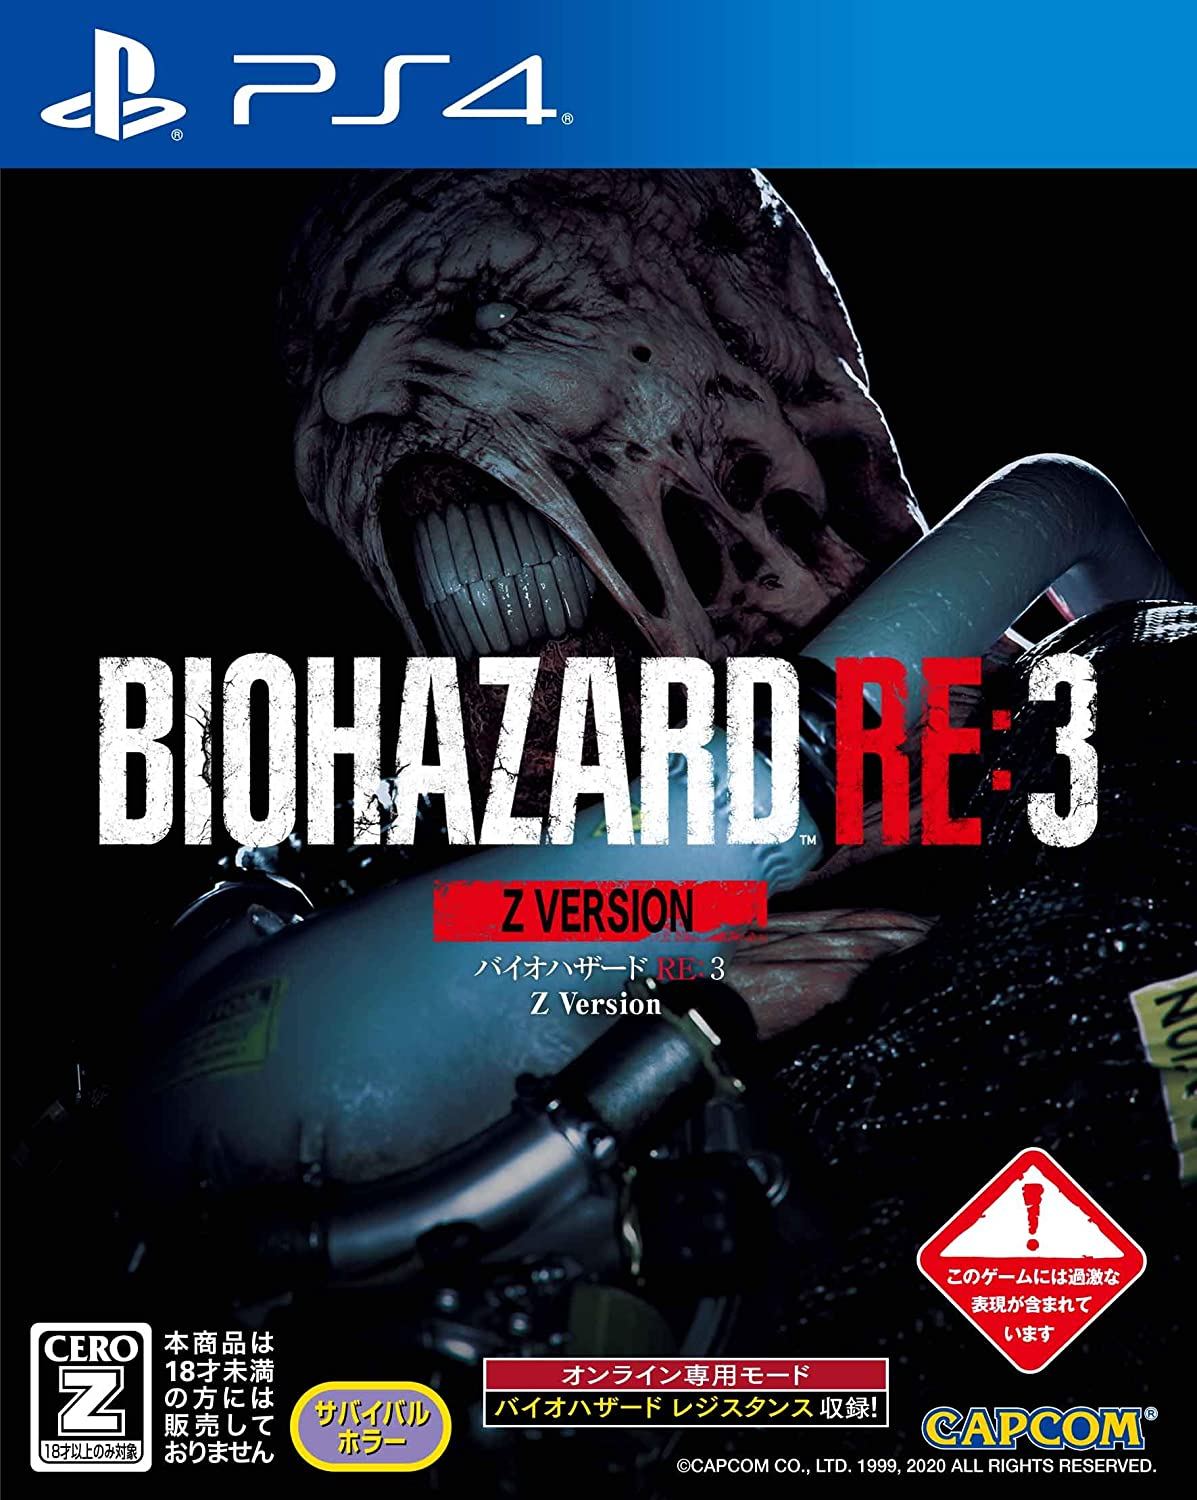 PS4 Resident Evil 3 Biohazard Re 3 HK, Chinese Collector's Limited Z Version 